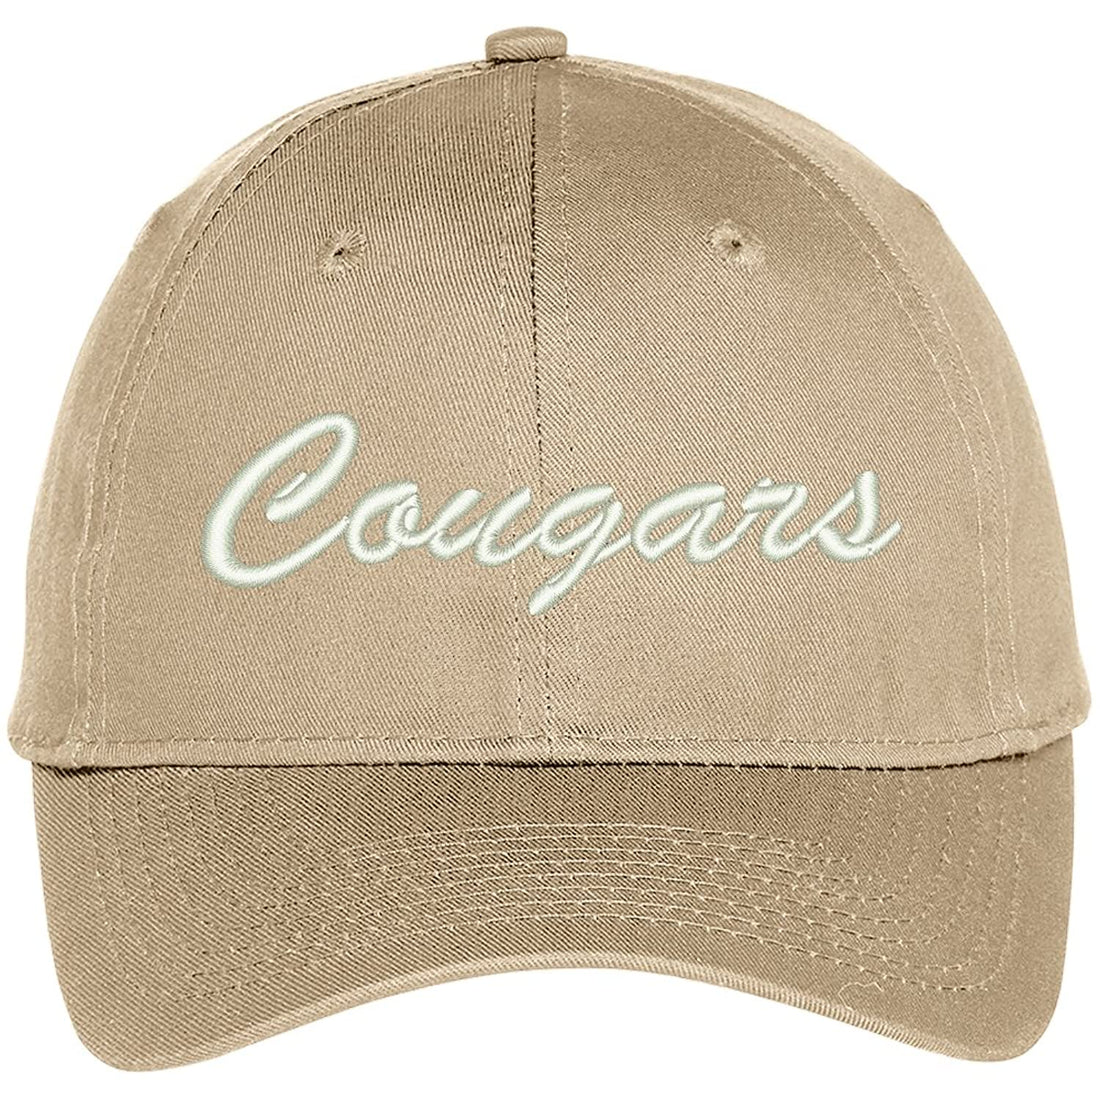 Trendy Apparel Shop Cougars Embroidered Team Nickname Mascot Cap